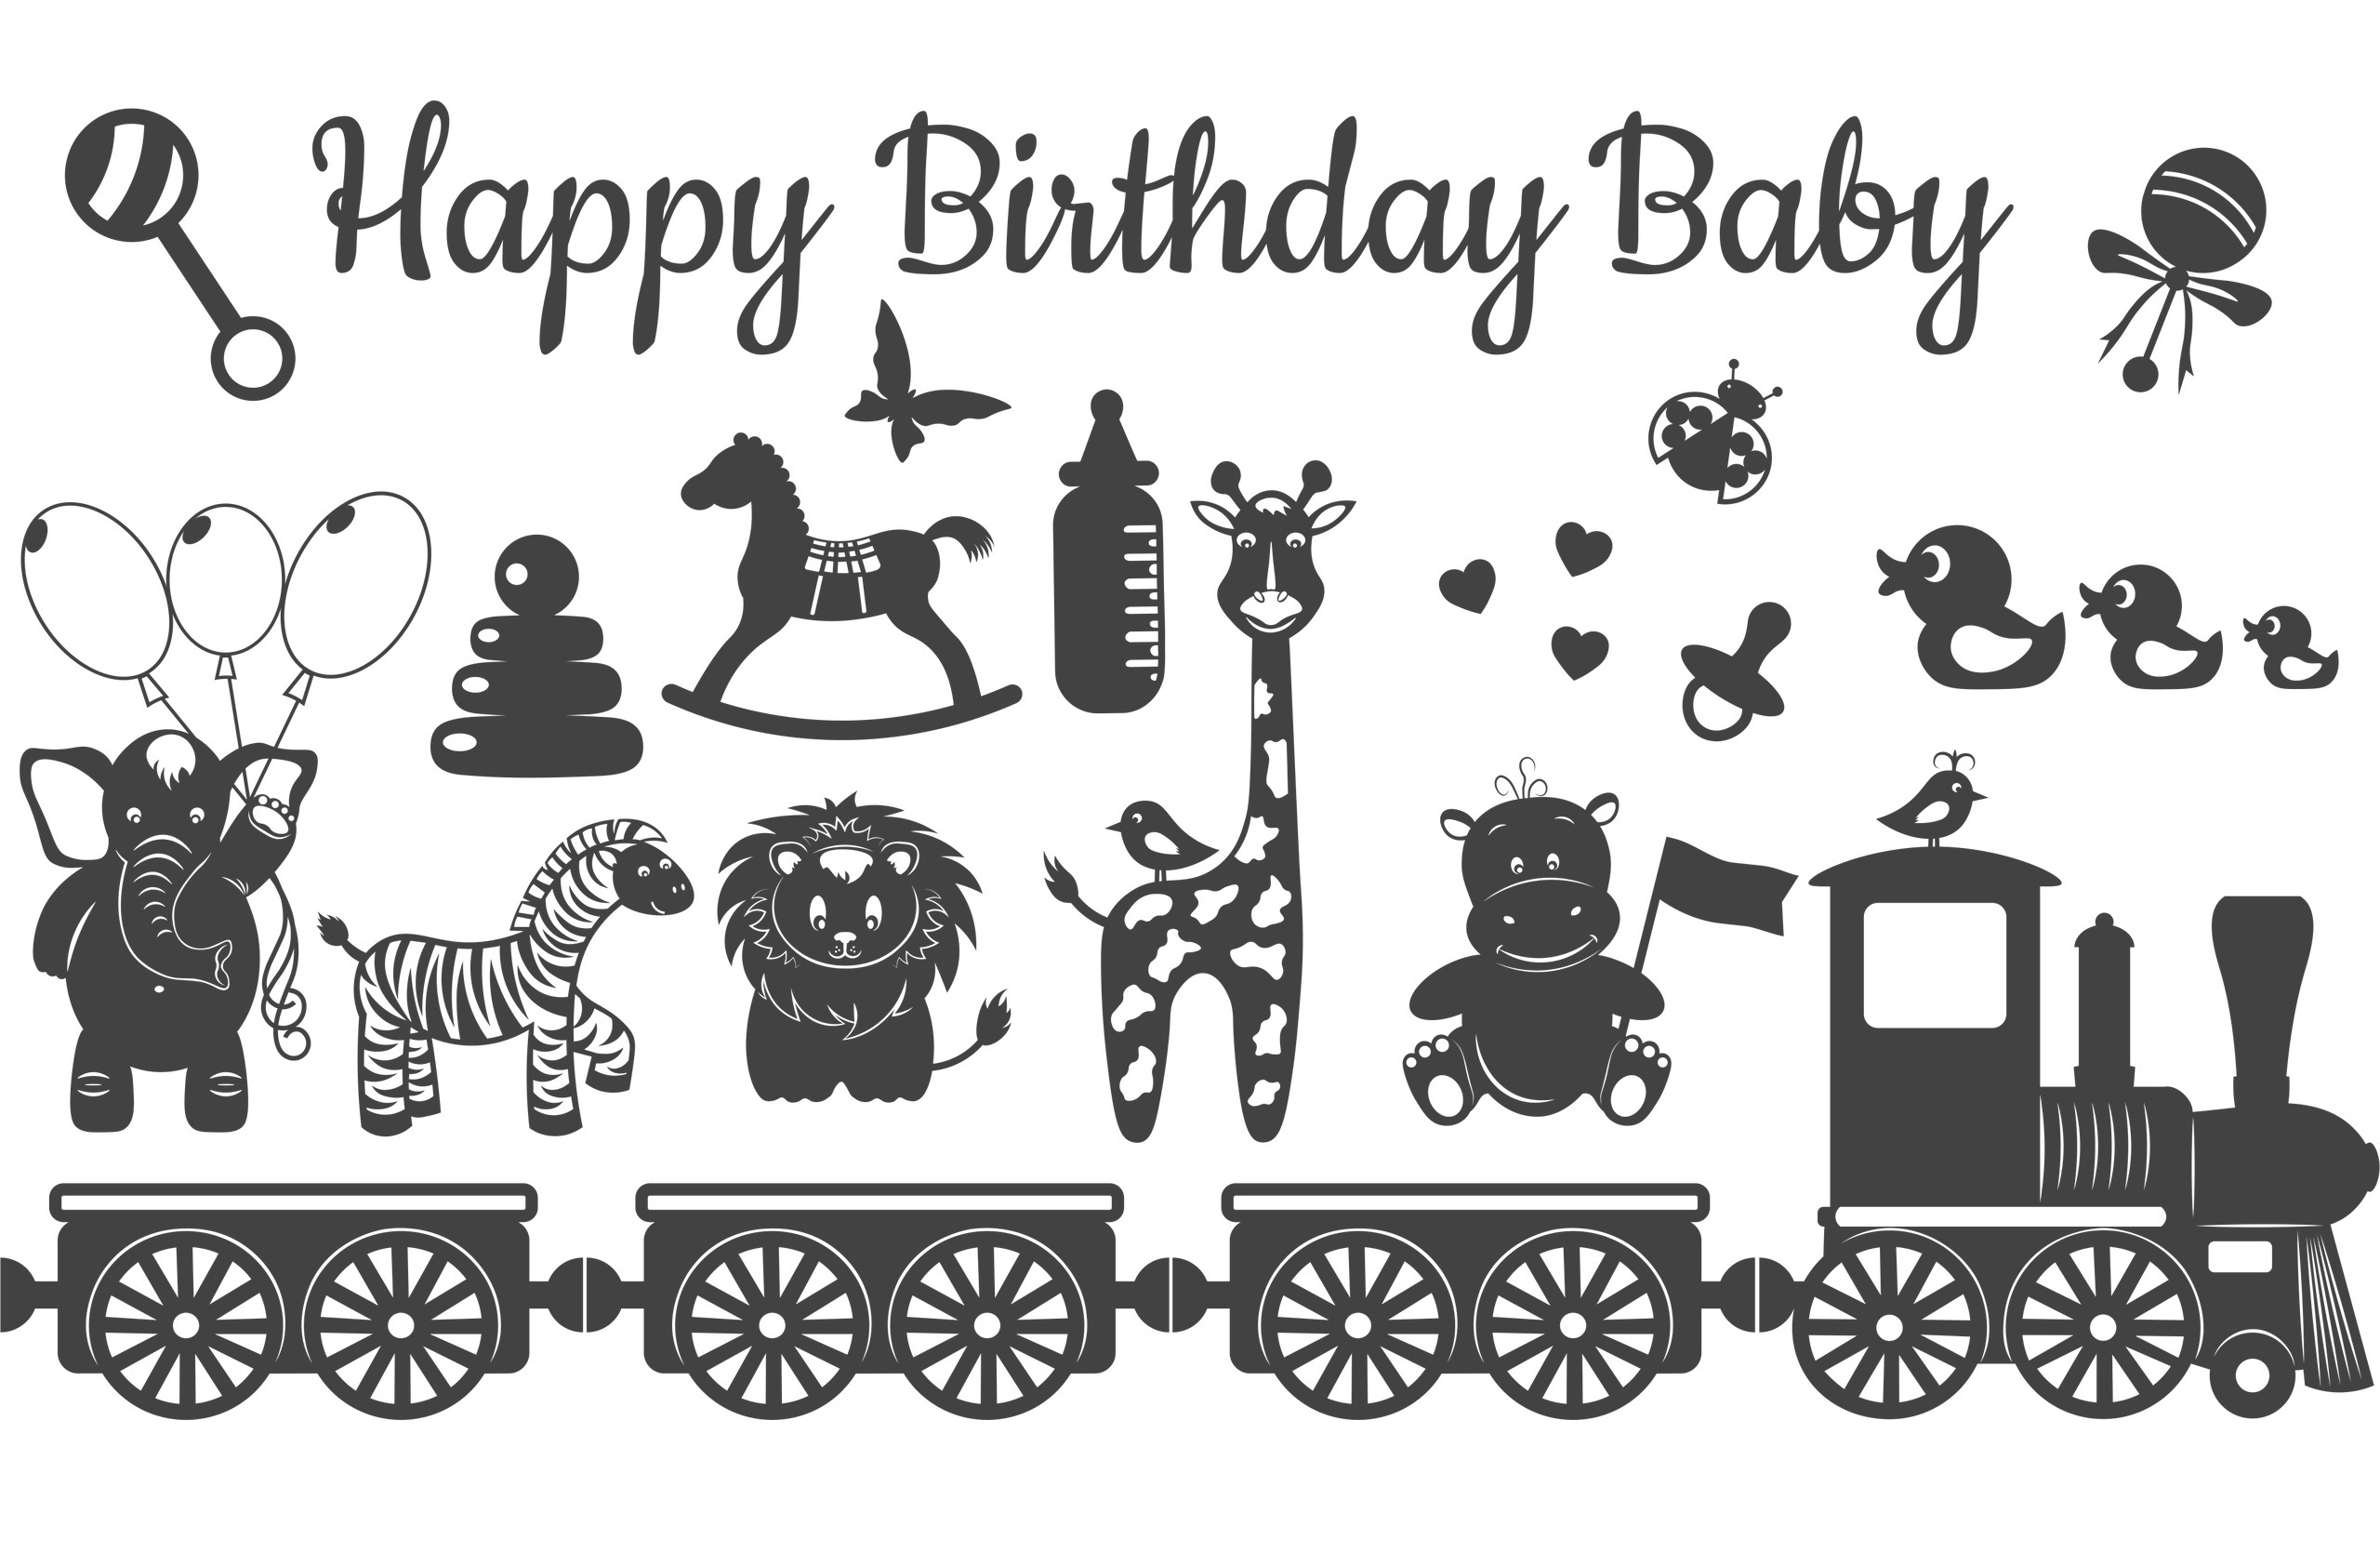 Laser Cut Engrave Baby Birthday Decorations Free Vector